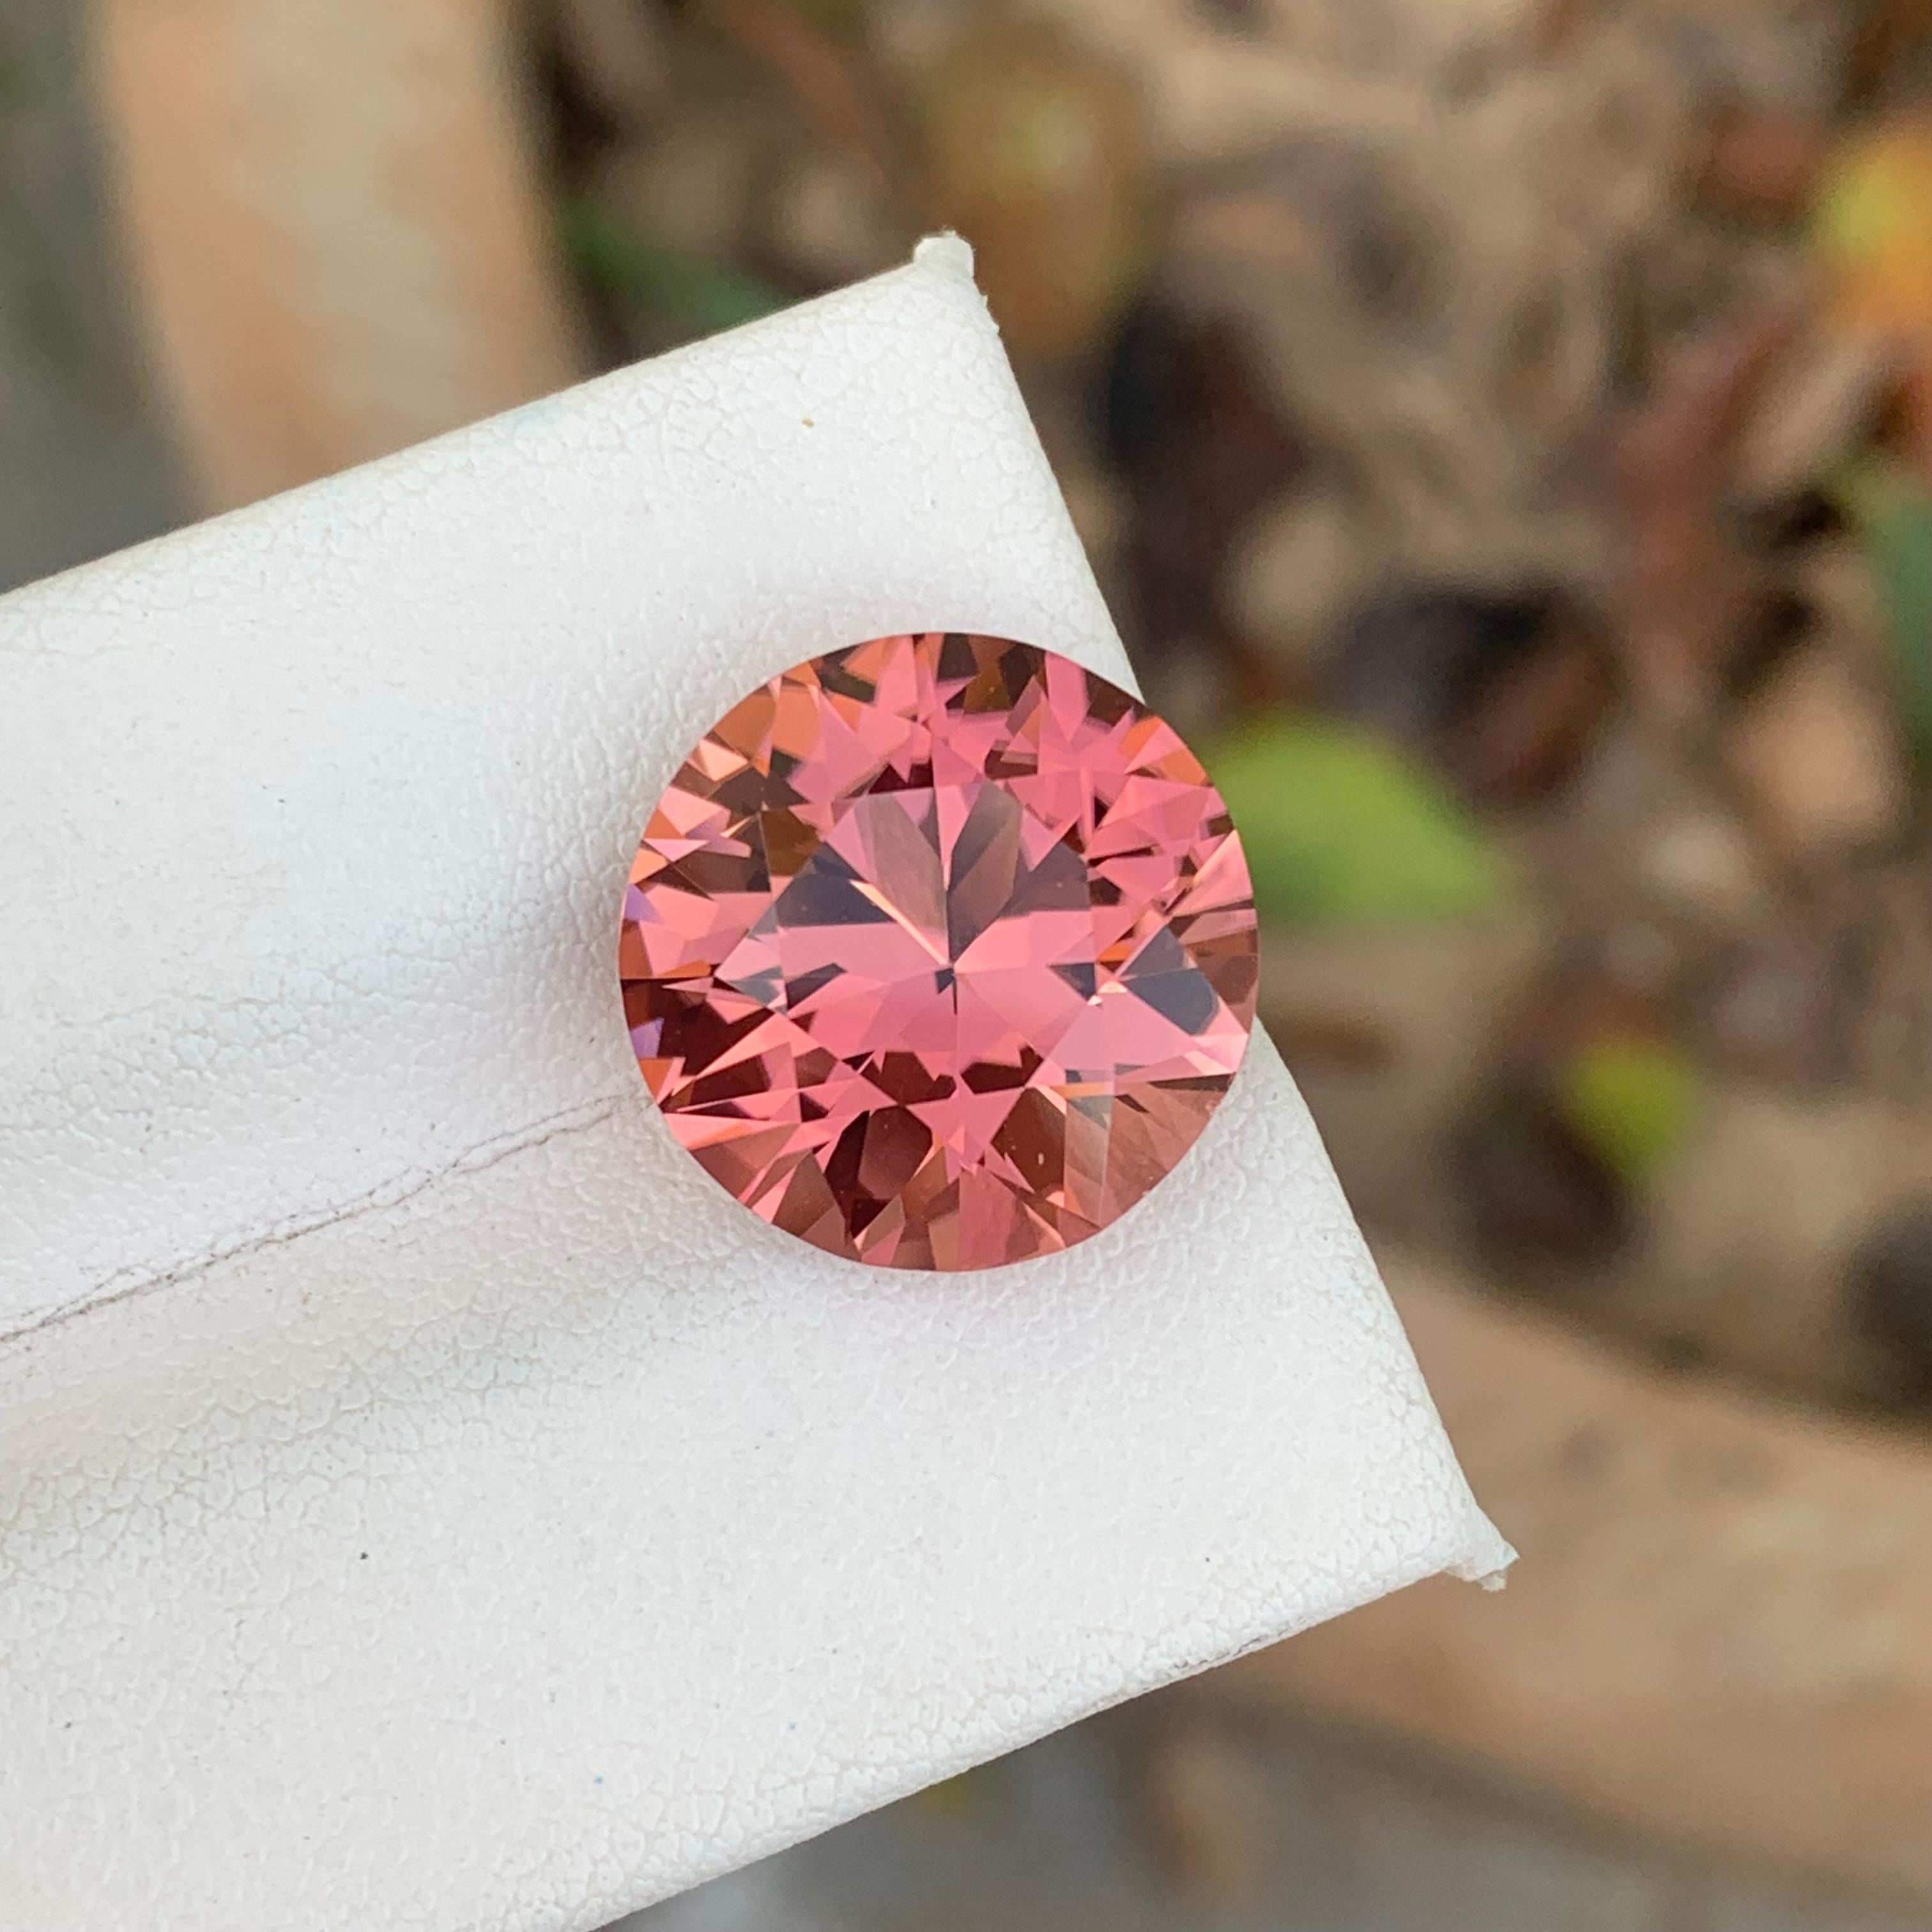 Gemstone Type :  Rubellite Tourmaline
Weight : 9.90 Carats
Dimensions : 14.6x14.6x9 Mm
Origin : Afghanistan
Clarity :  Loupe Clean
Shape: Round
Color: Pink
Certificate: On Demand
Pink tourmalines with reasonably saturated dark pink to red colors and